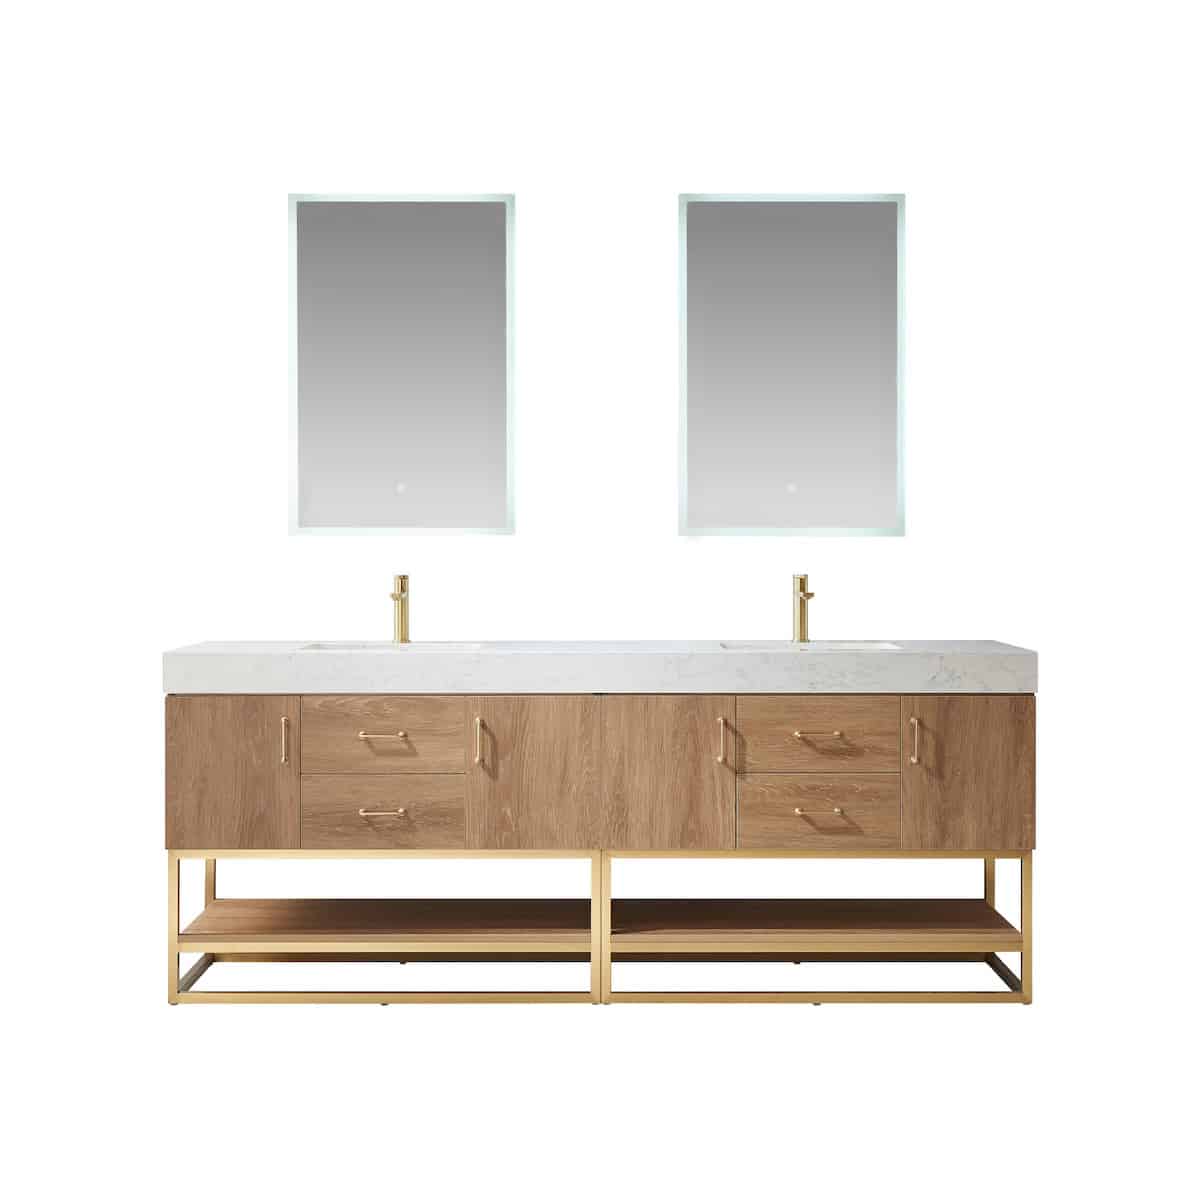 Vinnova Alistair 84 Inch Freestanding Double Vanity in North American Oak and Brushed Gold Frame with White Grain Stone Countertop With Mirrors 789084-NO-GW